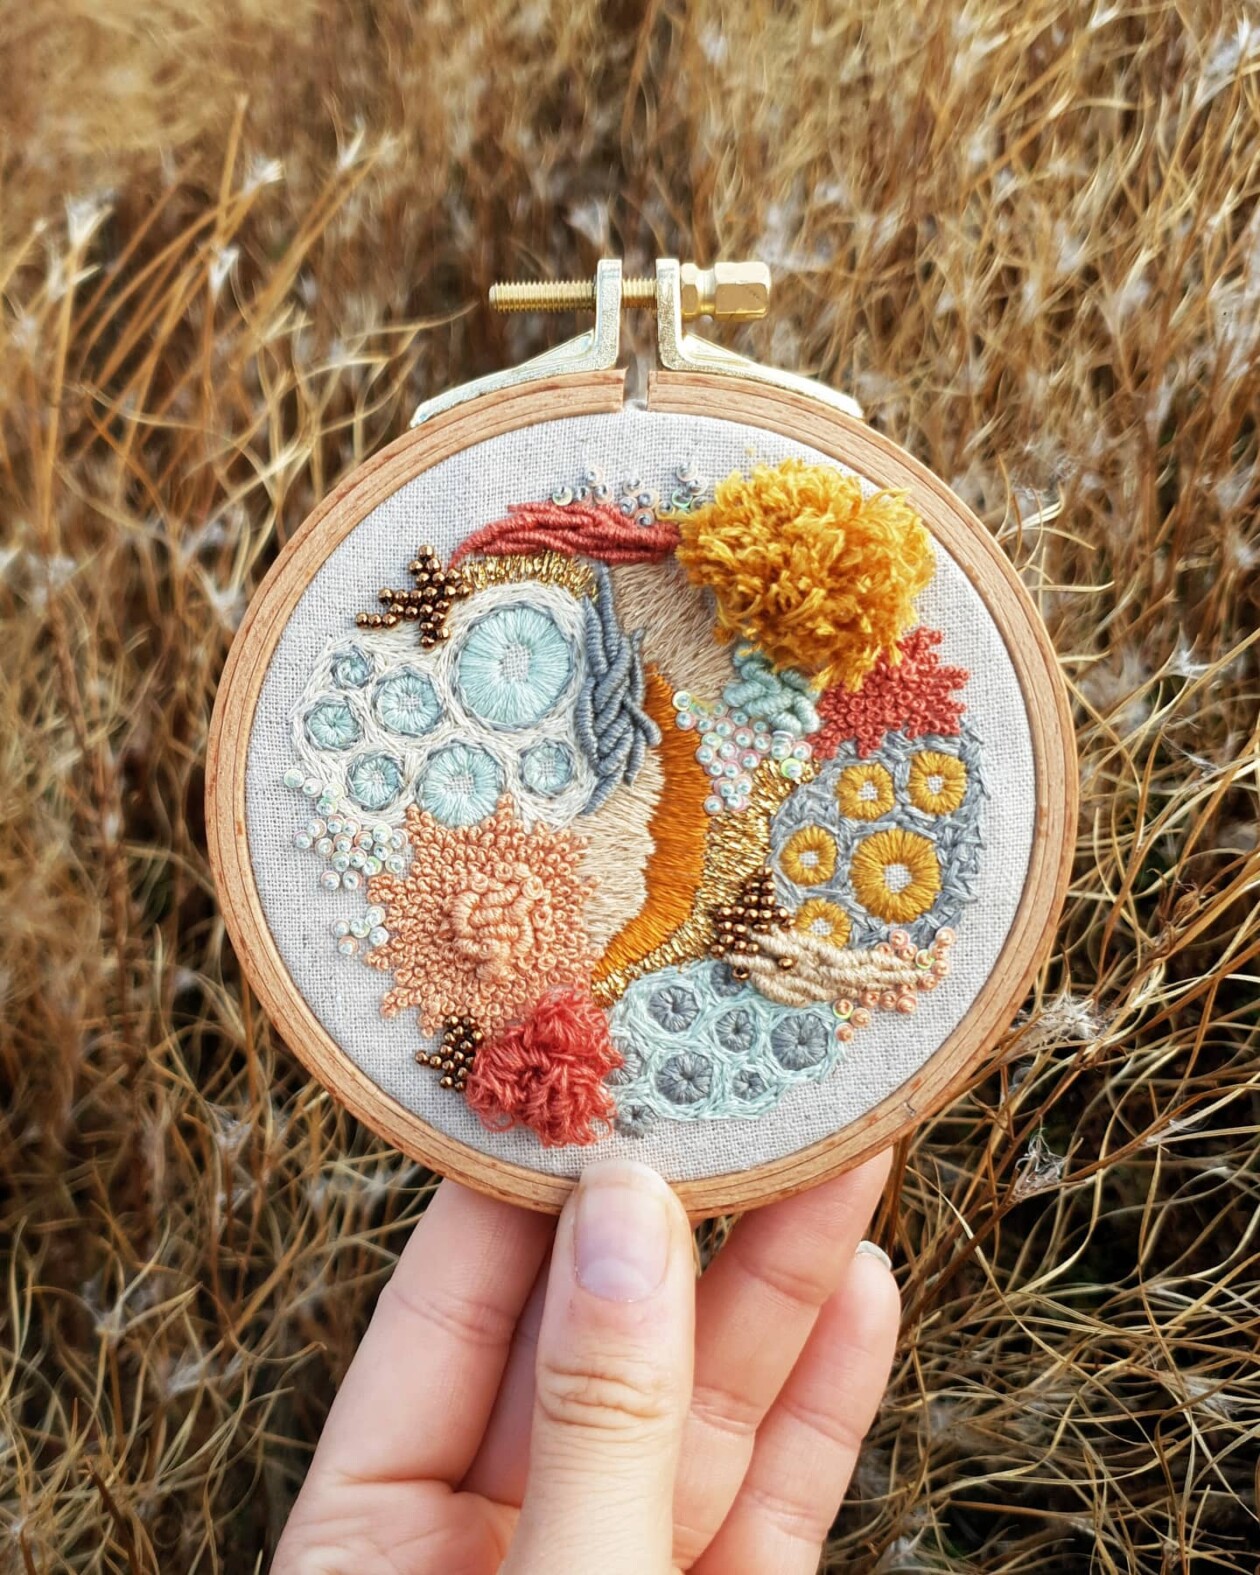 Marvelous Embroideries Inspired By Moss, Coral, And Lichen Forms By Hannah Kwasnycia (11)